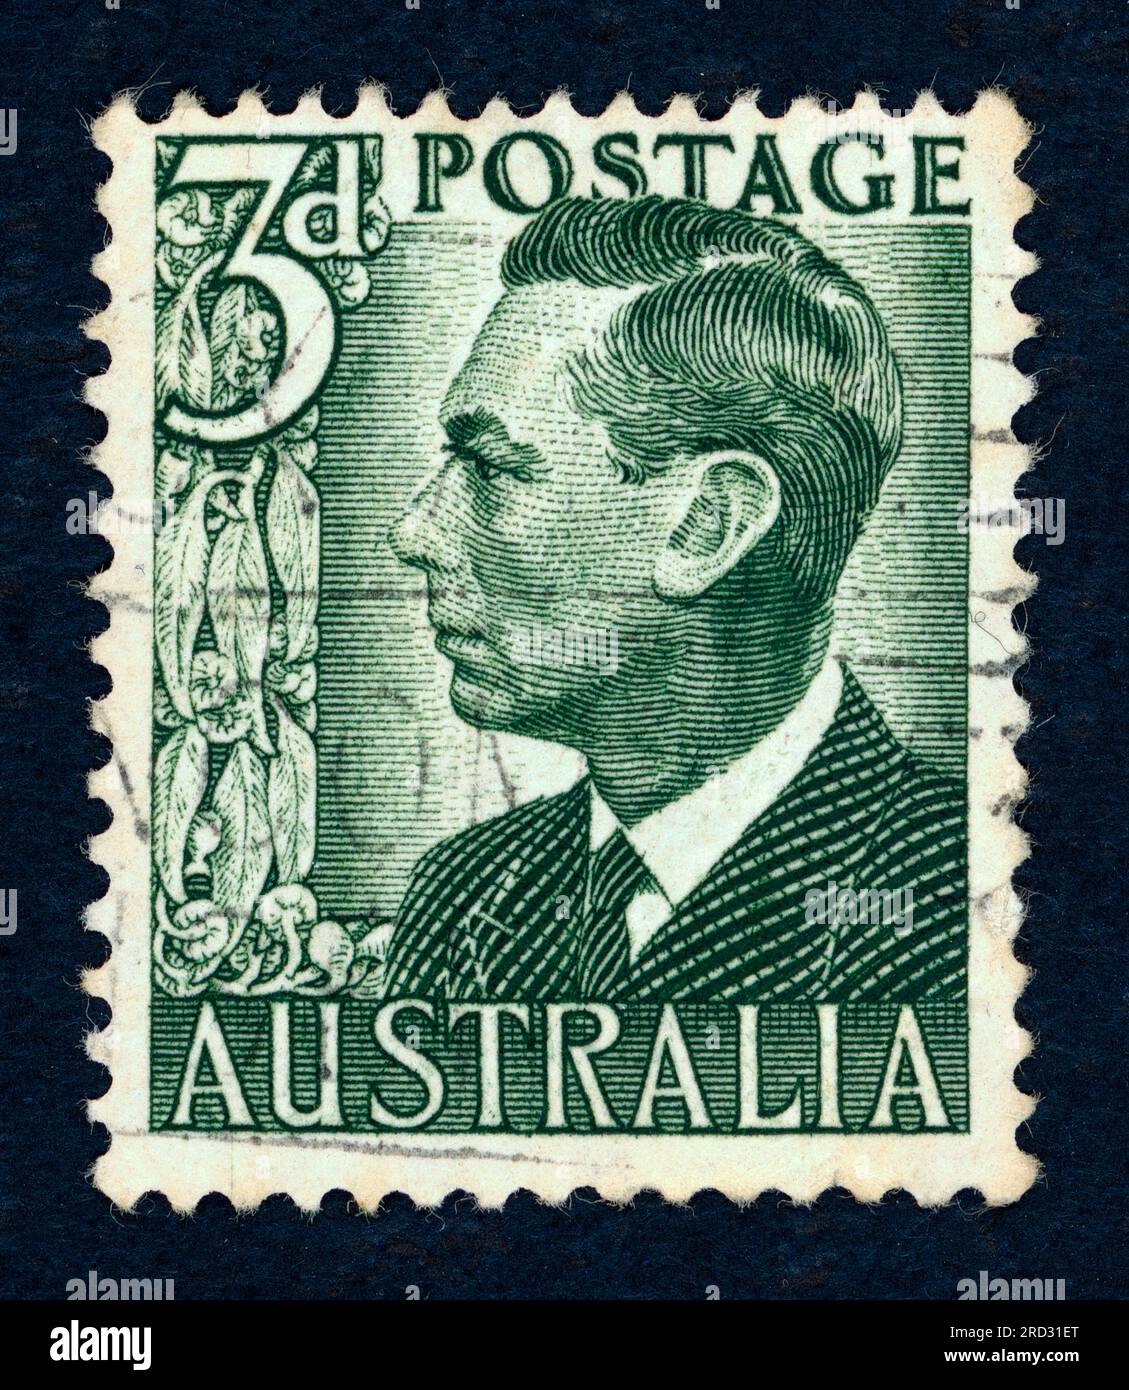 King George VI. Postage stamp issued in Australia. Stock Photo